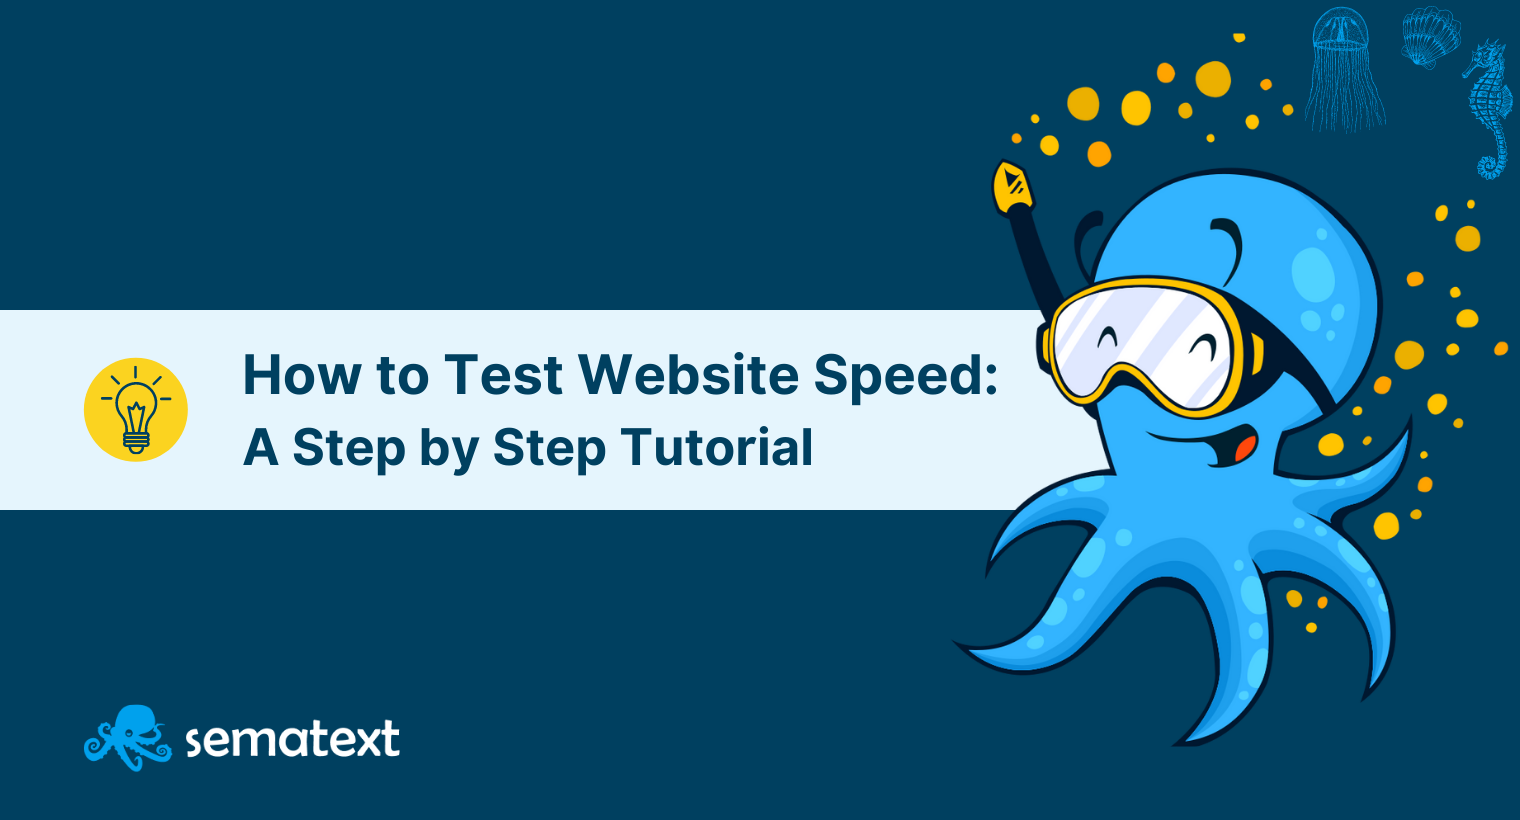 How to Test Website Speed: A Step by Step Tutorial on Measuring Page Load Times the Right Way